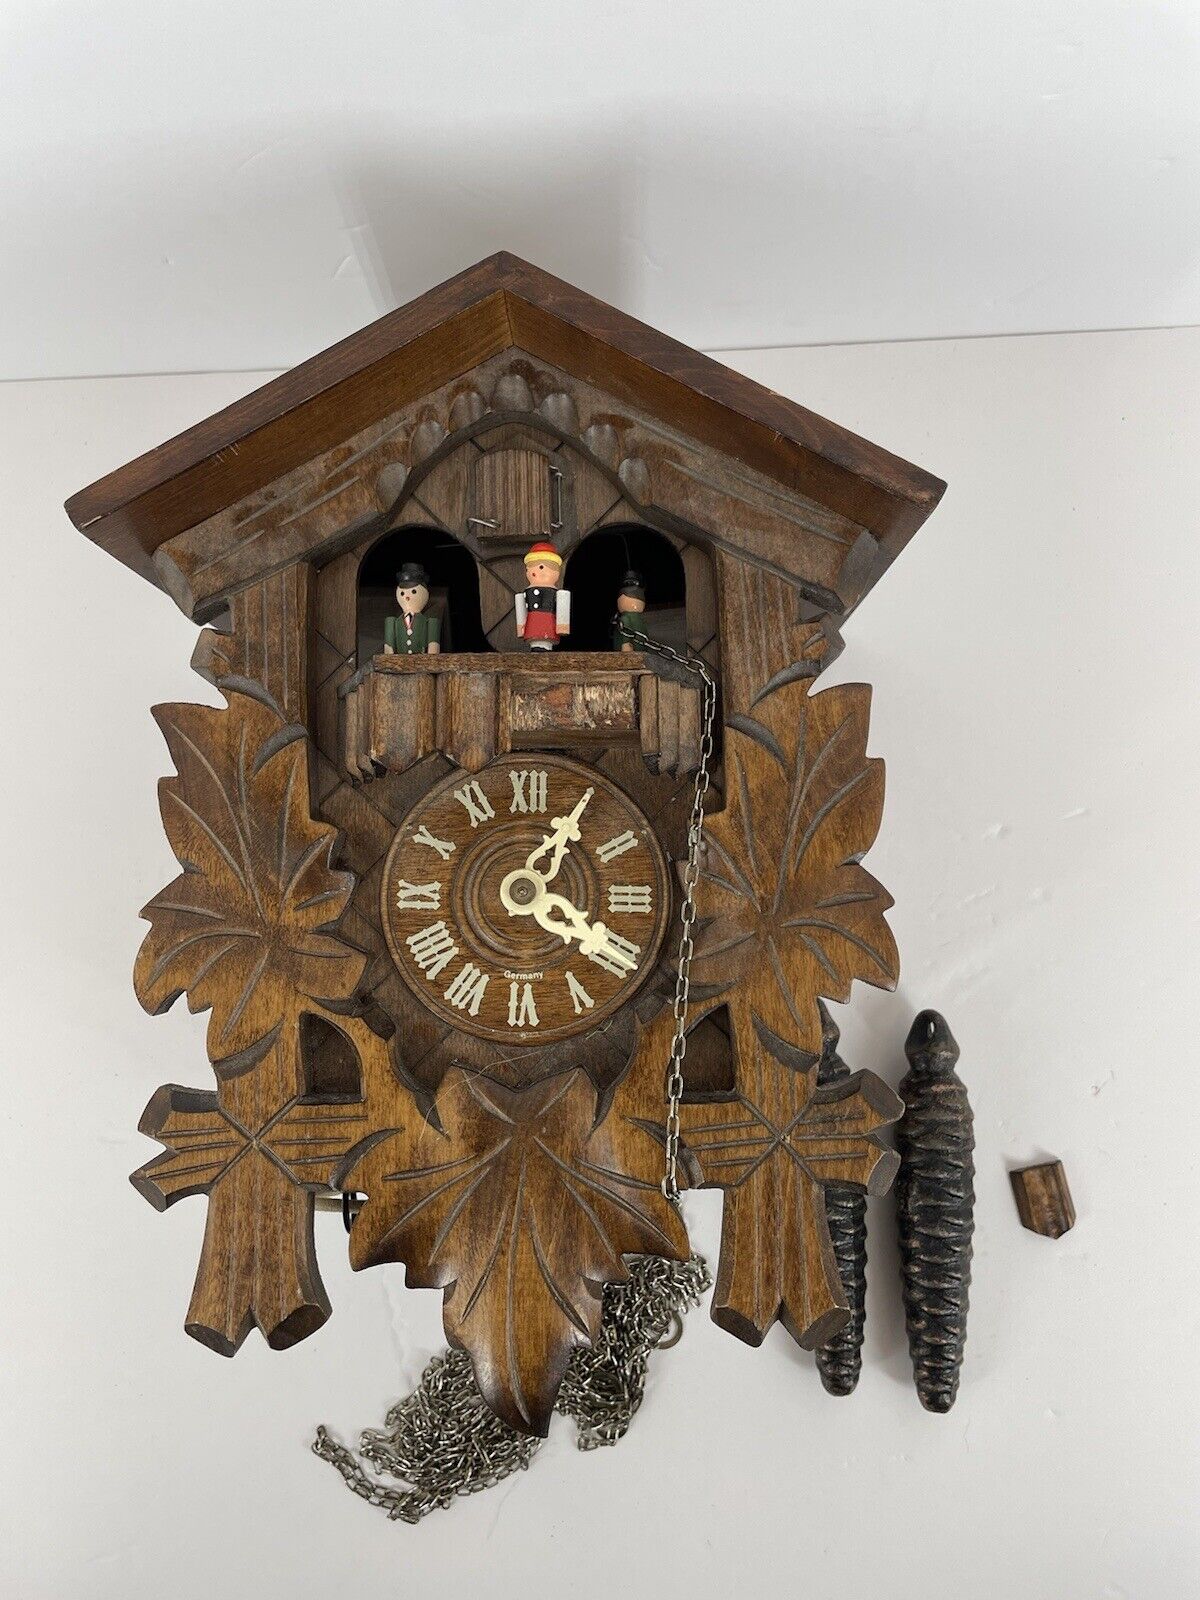 FOR PARTS READ VTG German Edelweiss  Hunter Cuckoo Clock. INCOMPLETE UNTESTED